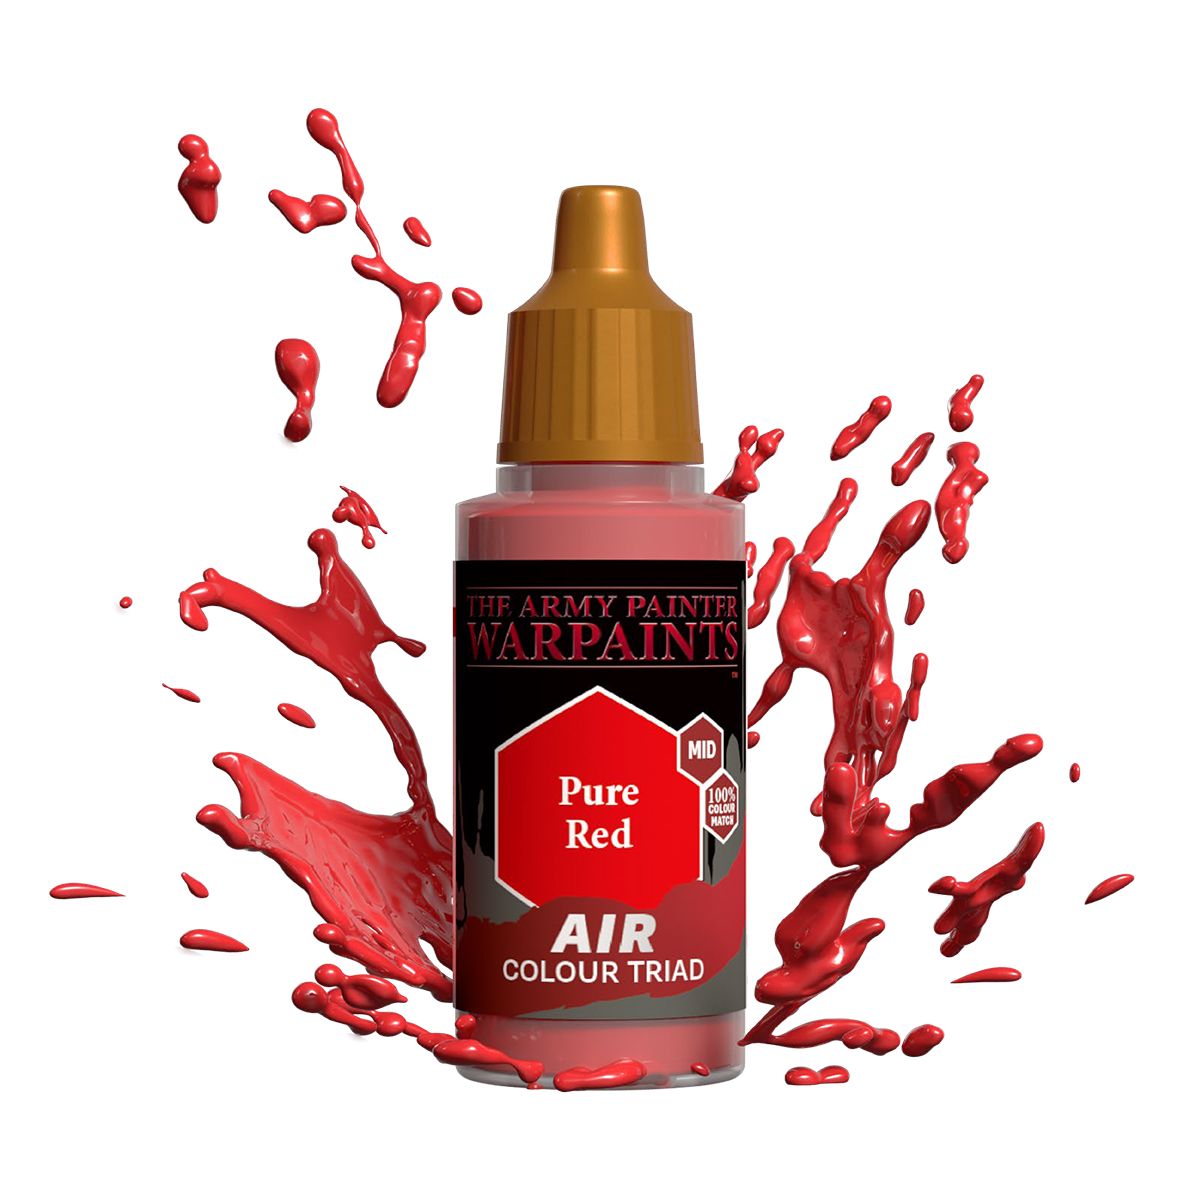 WARPAINTS AIR PURE RED